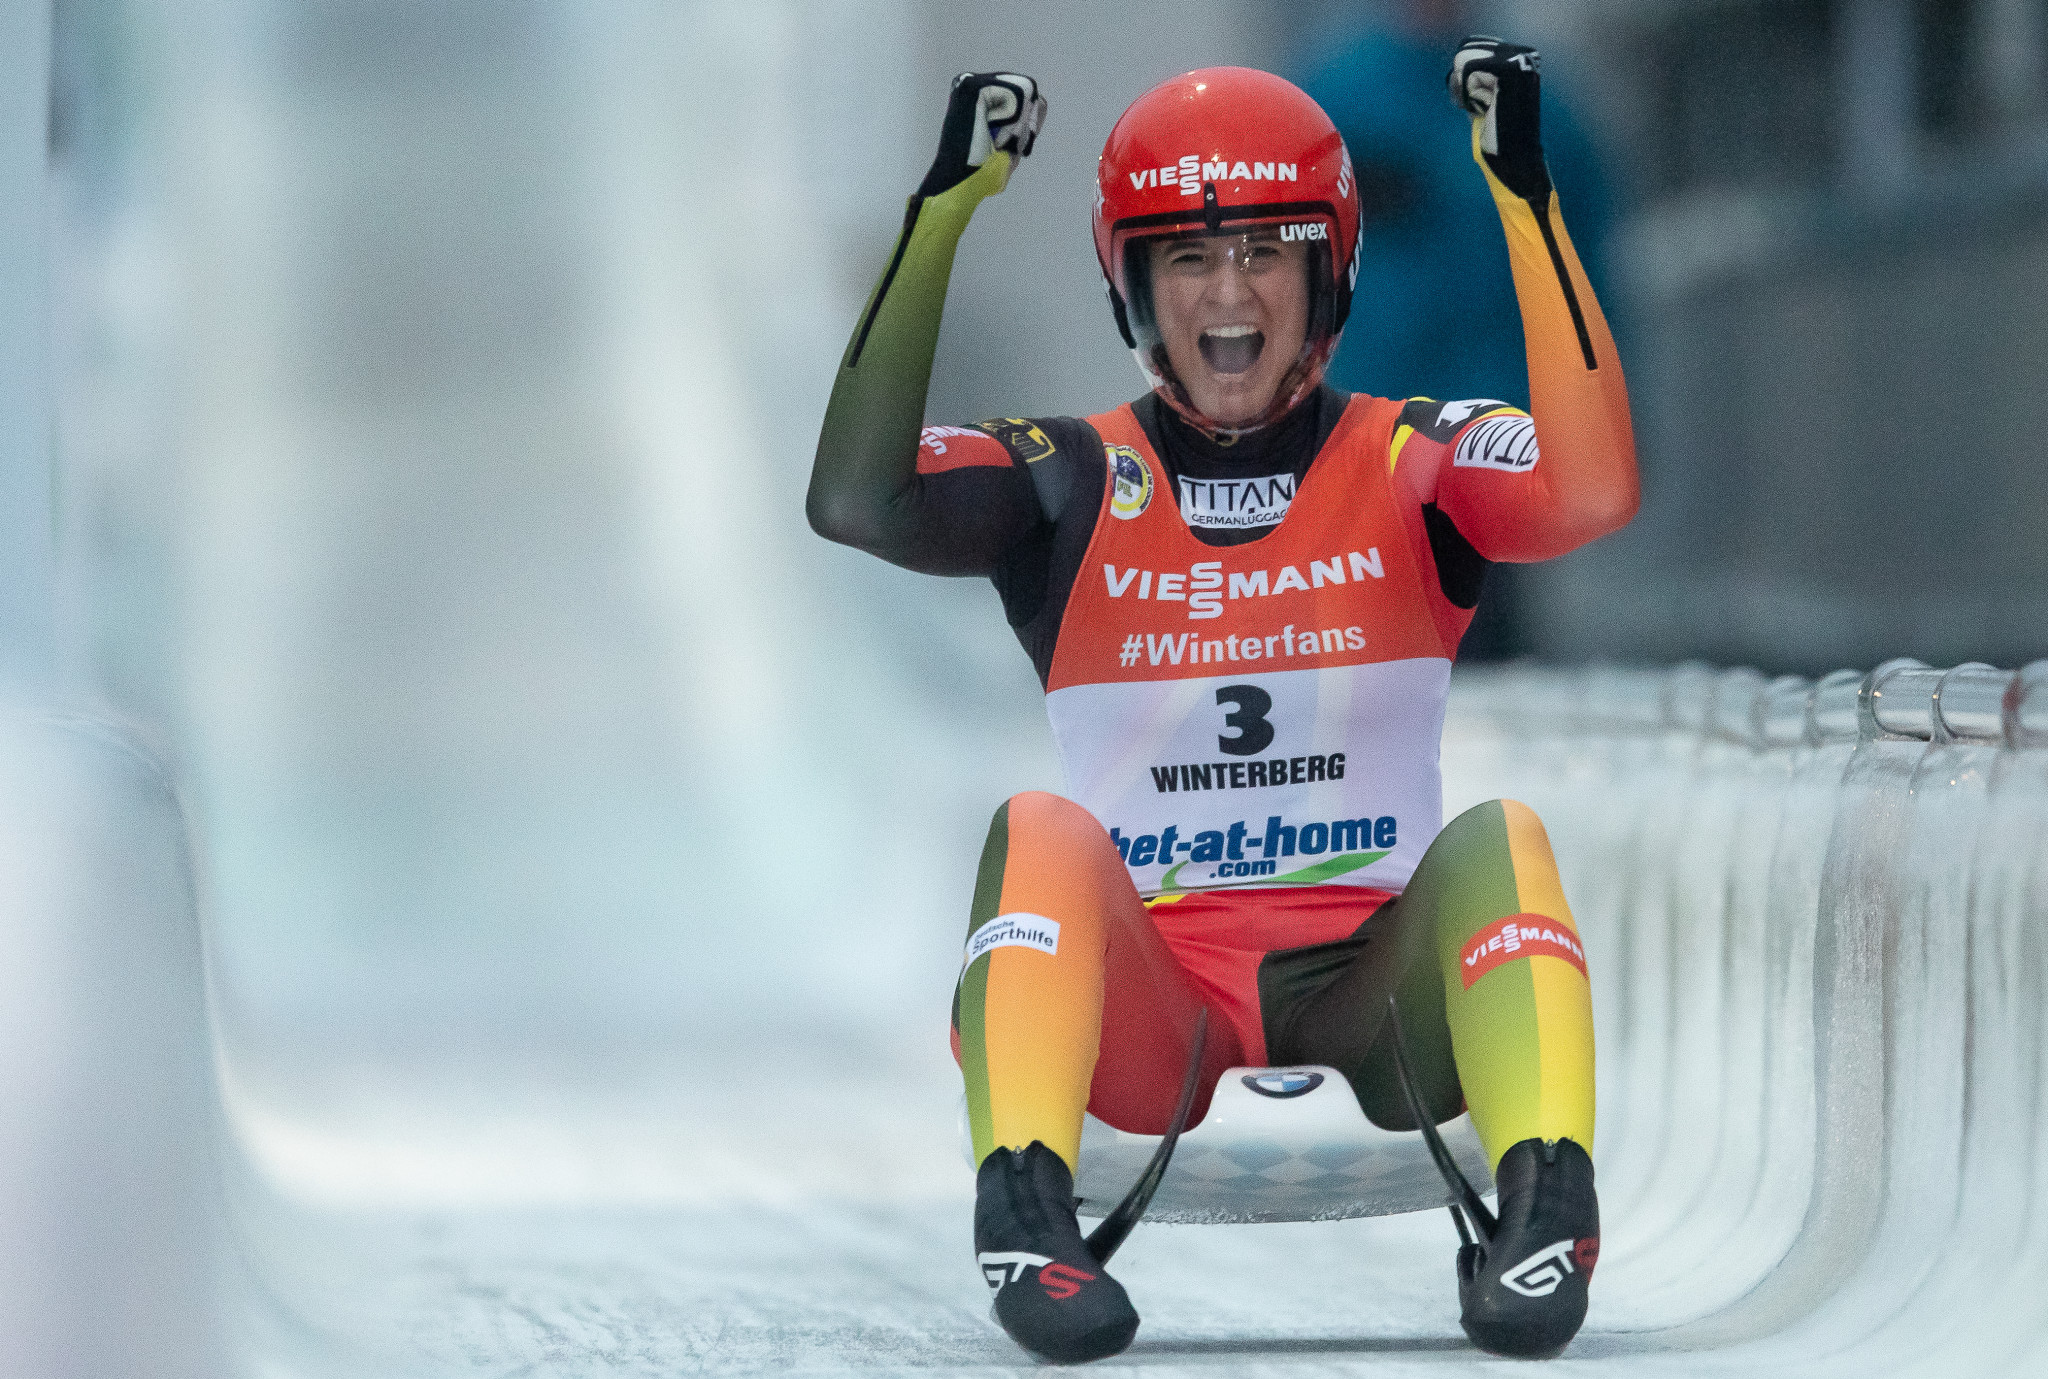 Geisenberger retains European title with victory at Luge World Cup in Oberhof